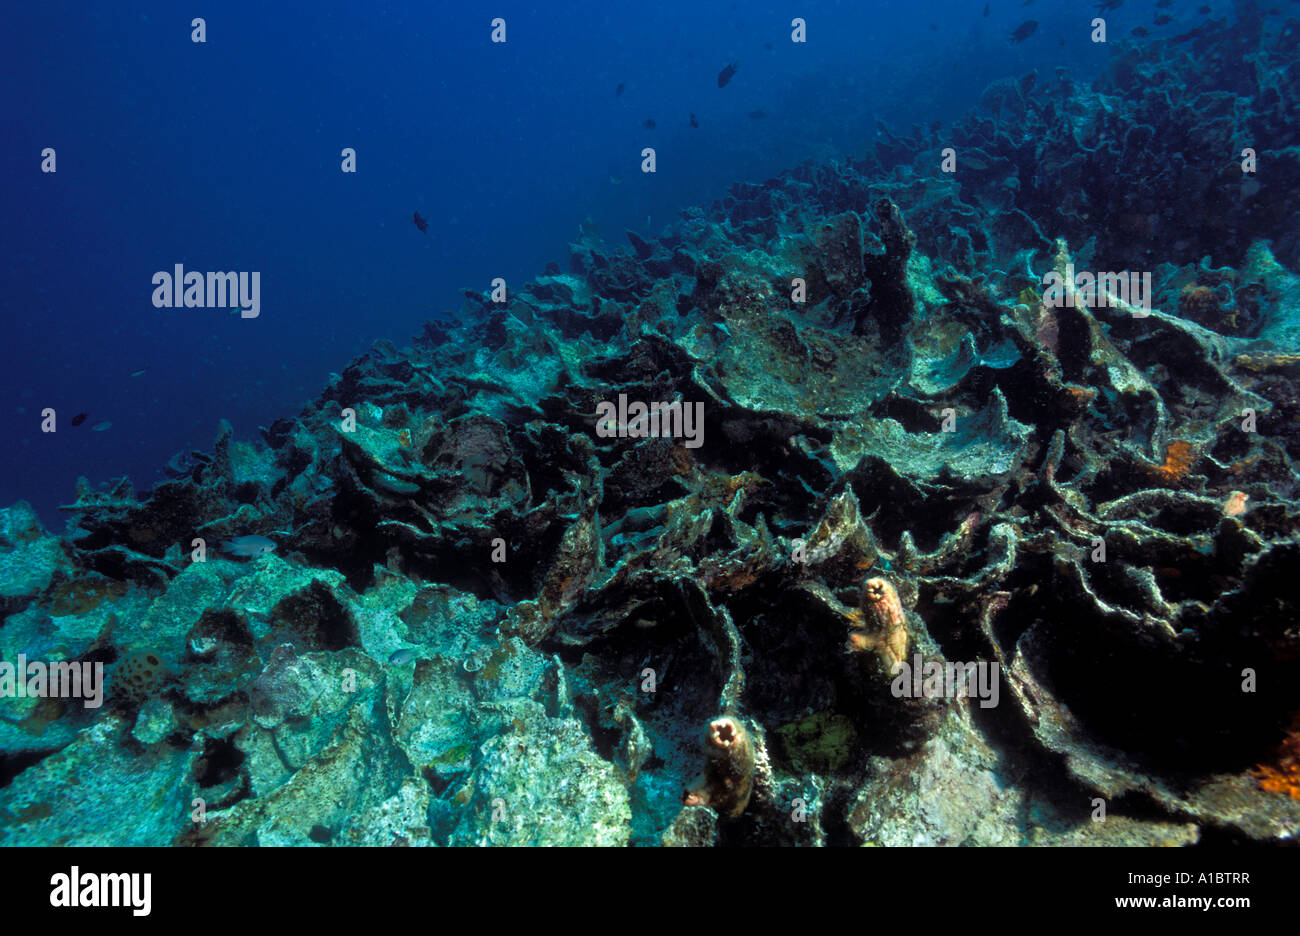 Dead corals after serious bleaching due from El Nino Coron Island Philippines Stock Photo